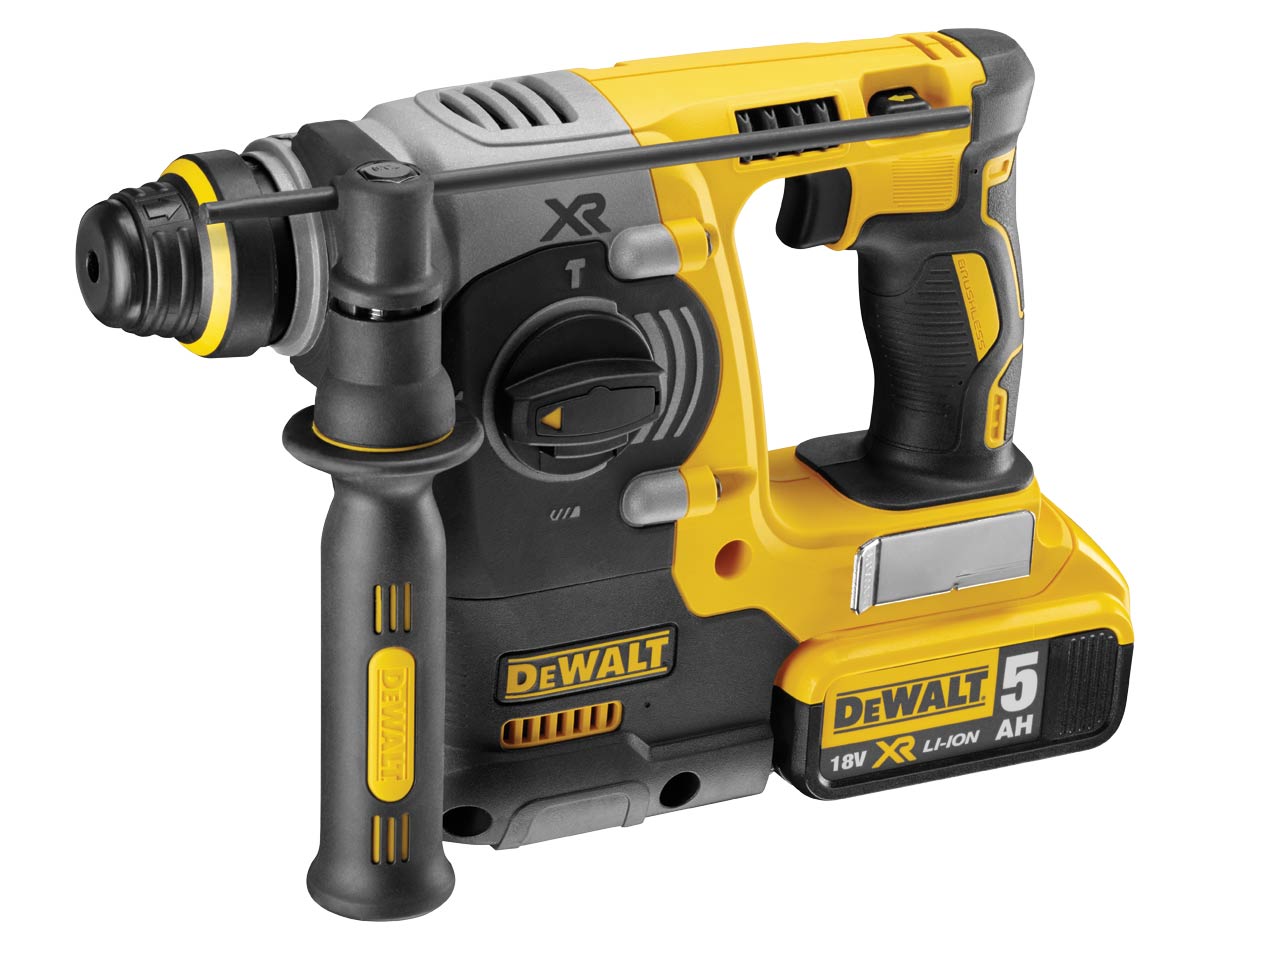 Dewalt  DCH033 18v Brushless SDS Plus Rotary Hammer Drill Cordless With Case